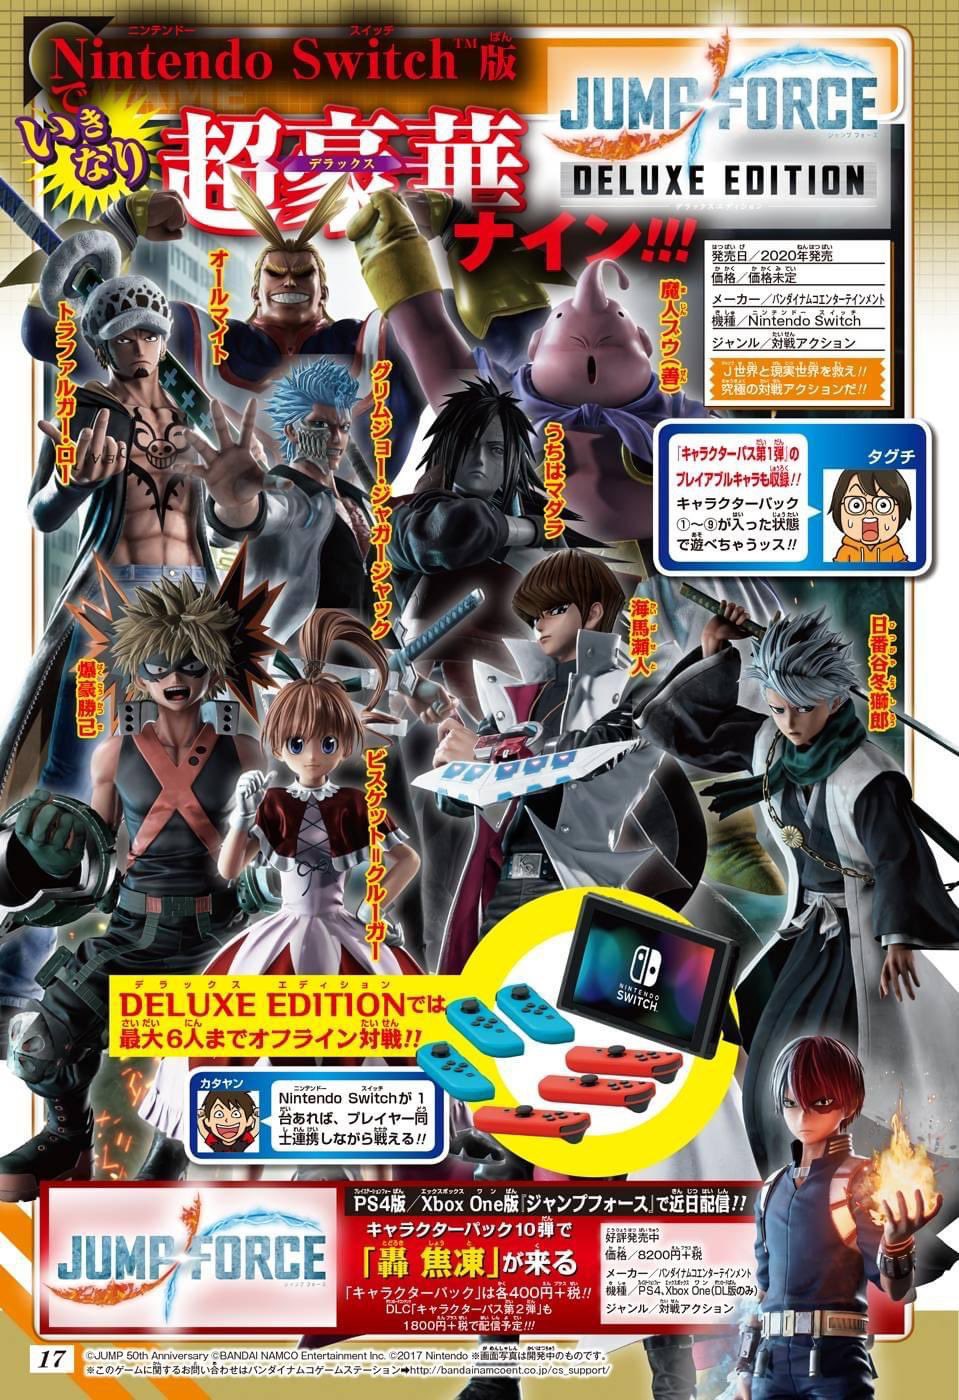 Spiralling Sphere Weekly Shonen Jump Jump Force Deluxe Edition For The New Nintendo Switch Laptop Brings Together A Collection Of Characters In The Story Of Anime In Several Generations Of